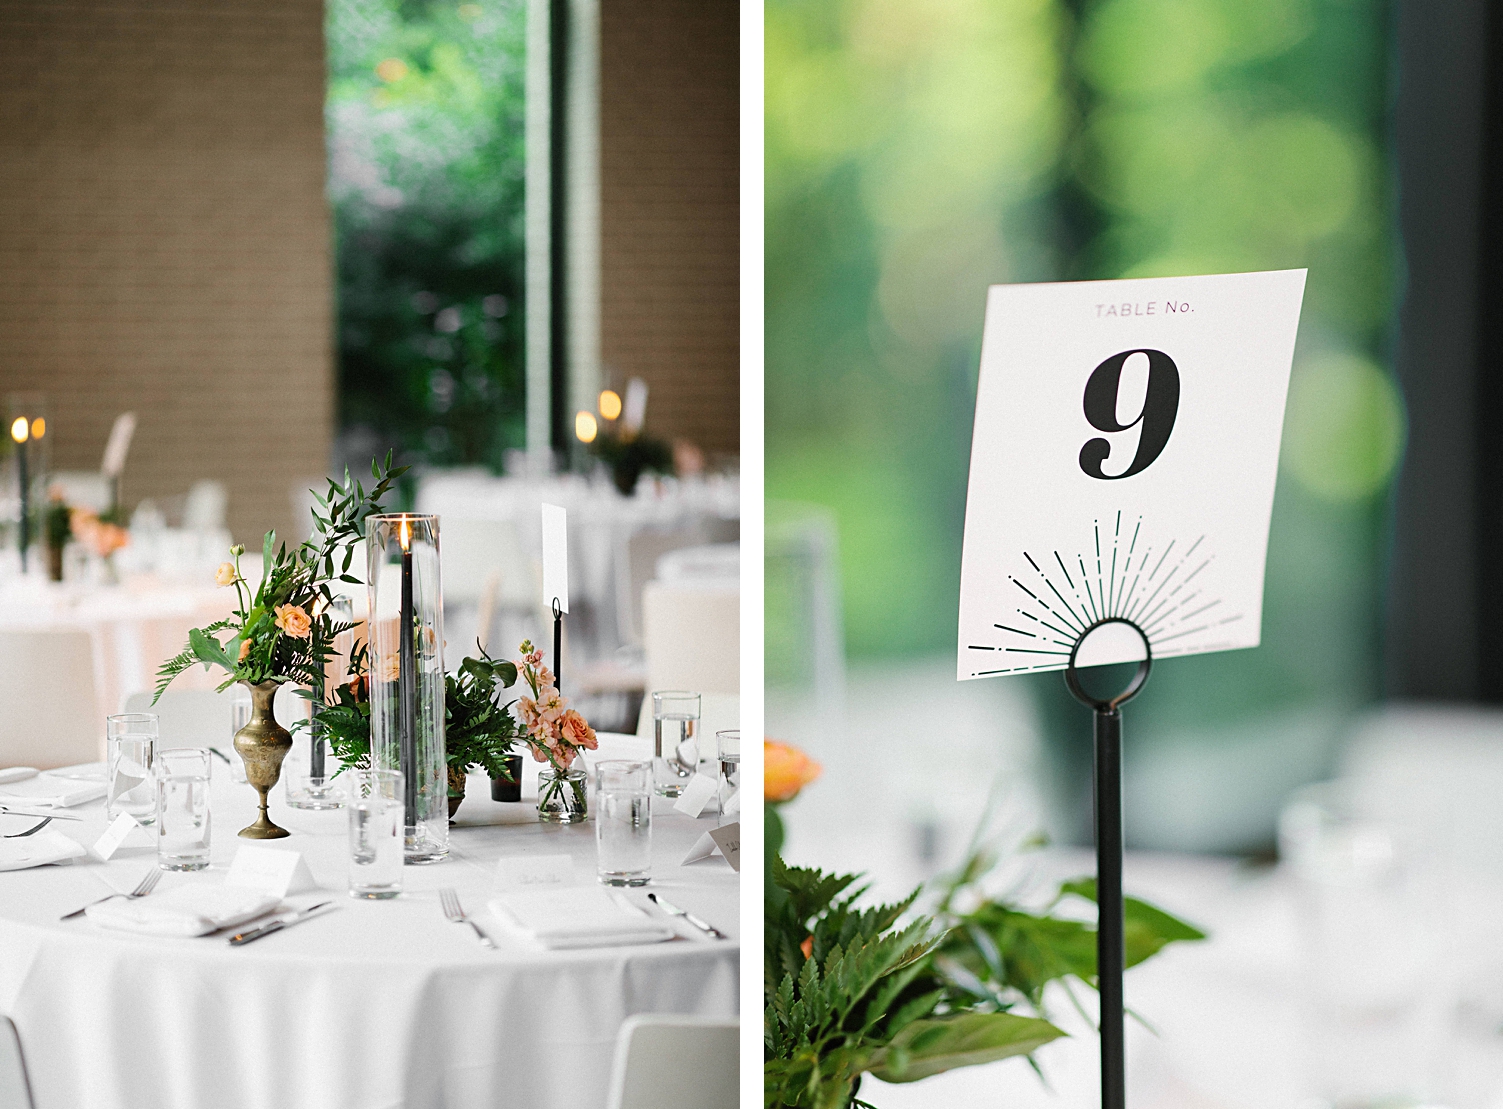 south congress hotel wedding table number reception